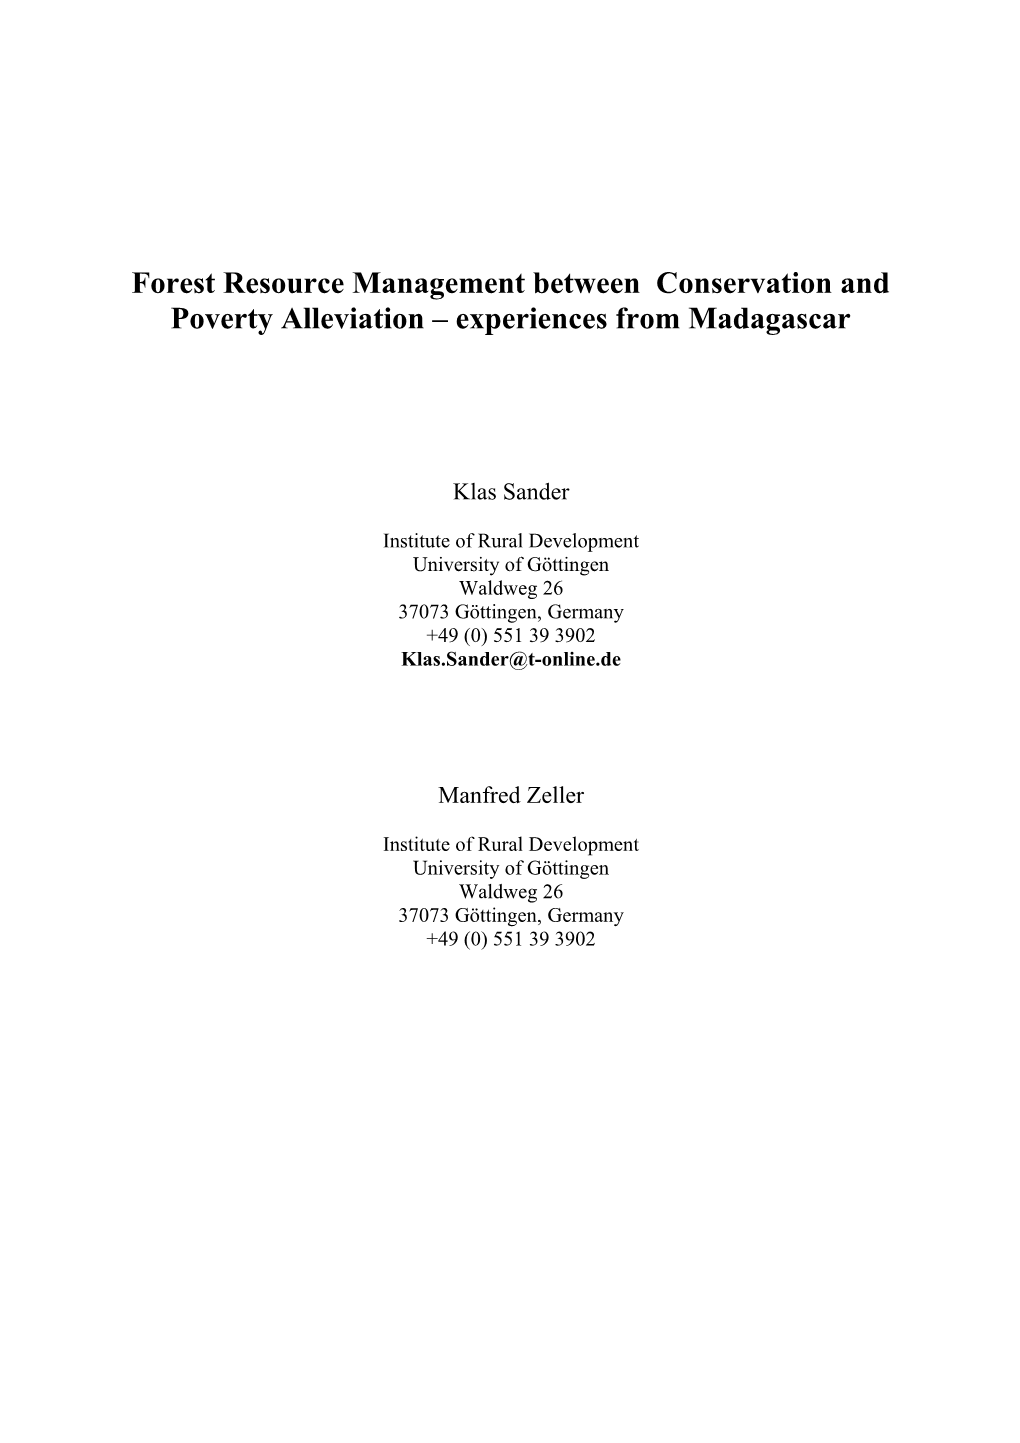 Forest Resource Management Between Conservation and Poverty Alleviation Experiences From